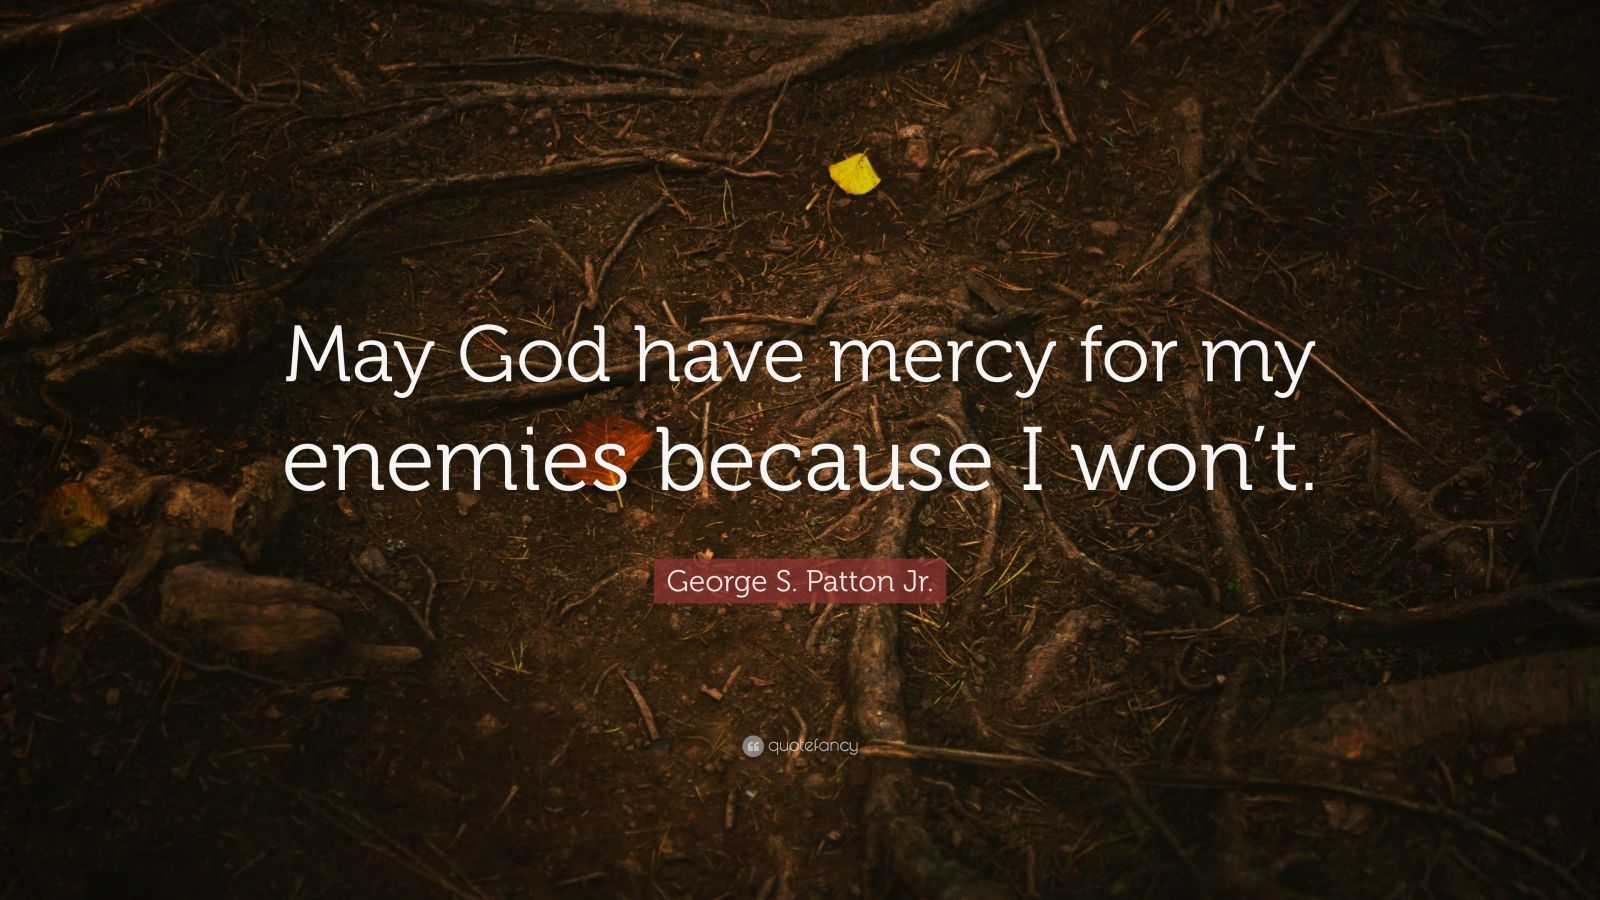 George S. Patton Jr. Quote: “May God have mercy for my enemies because